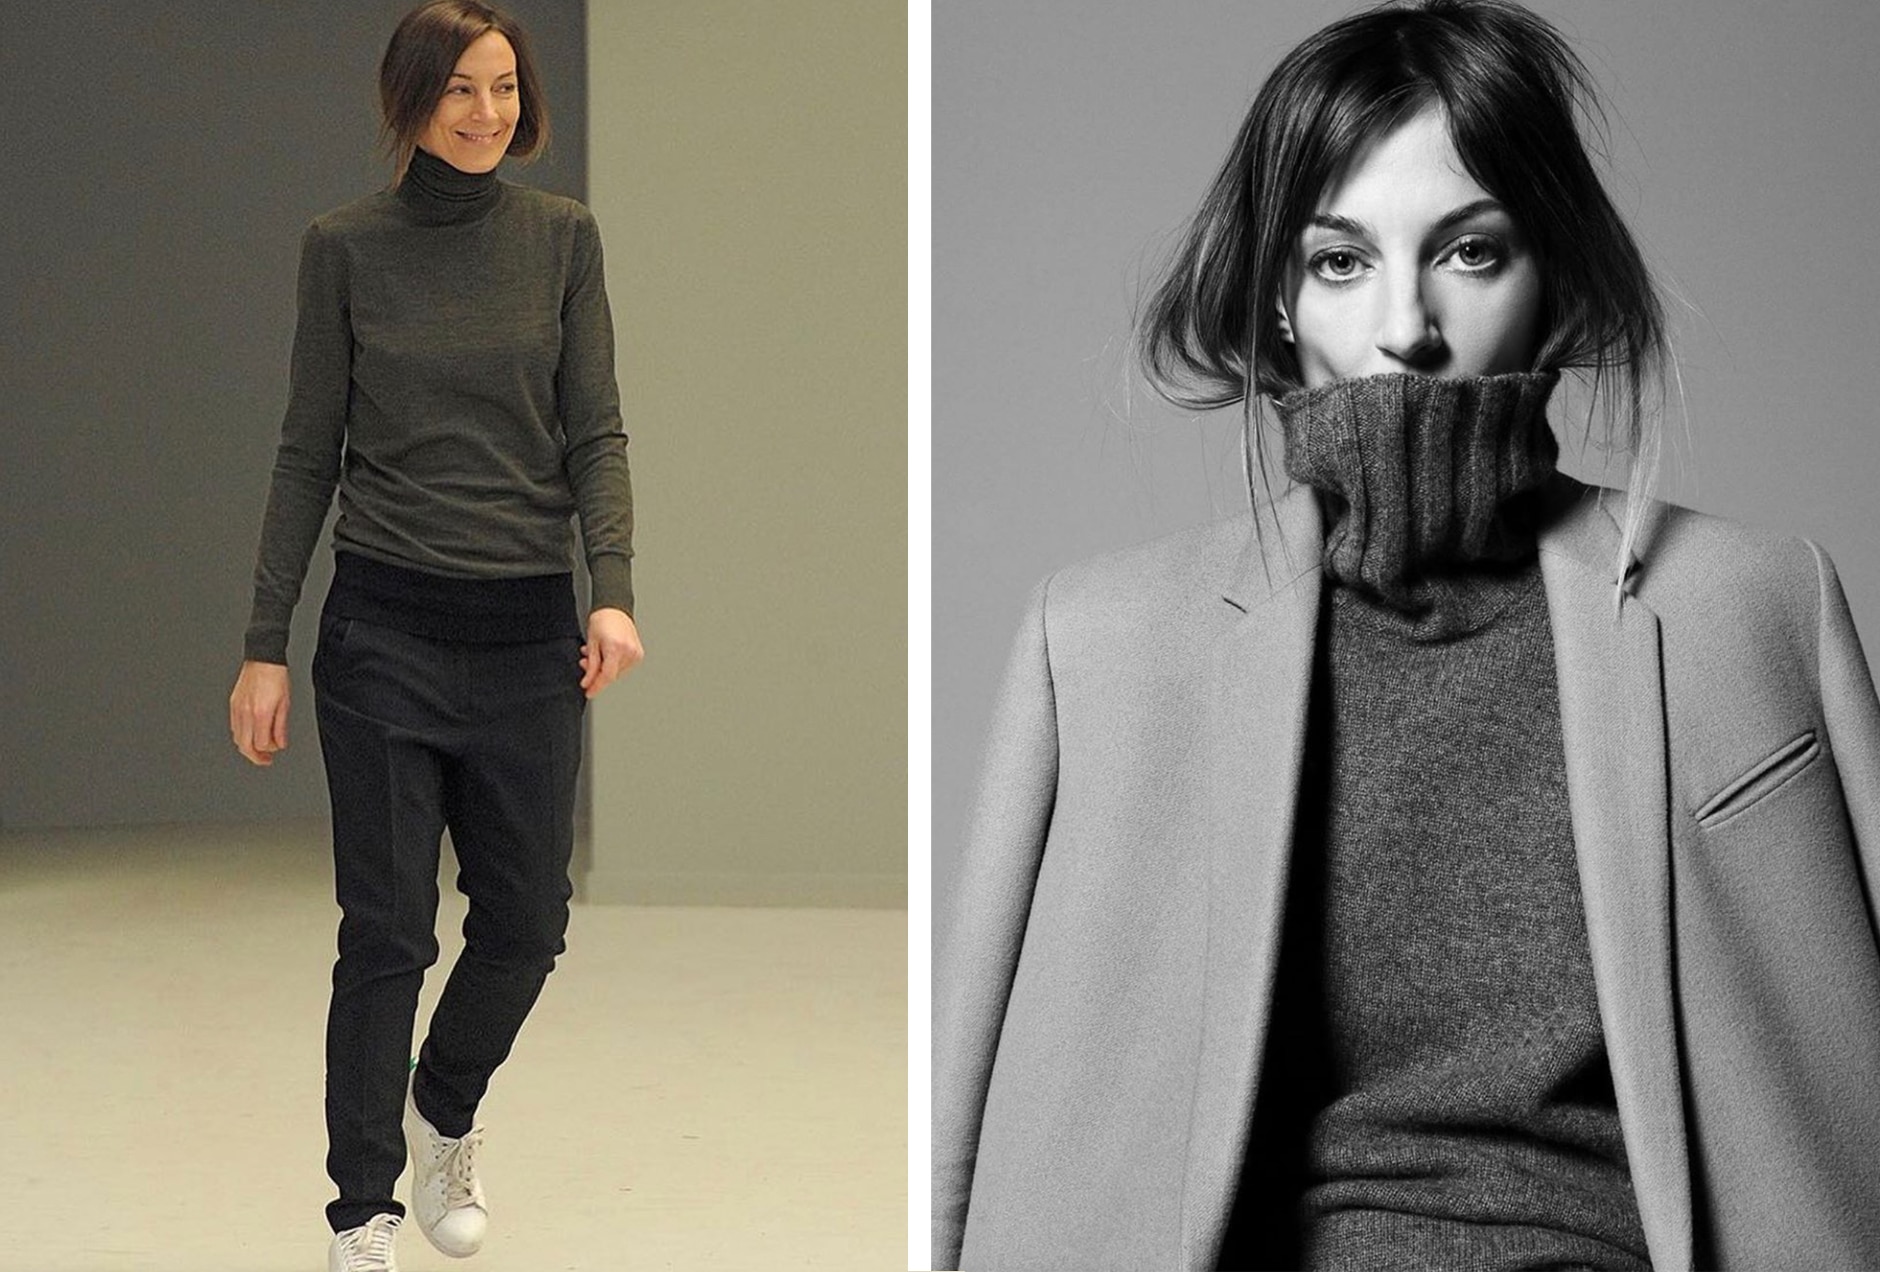 Baby come back: the reported return of Phoebe Philo - RUSSH